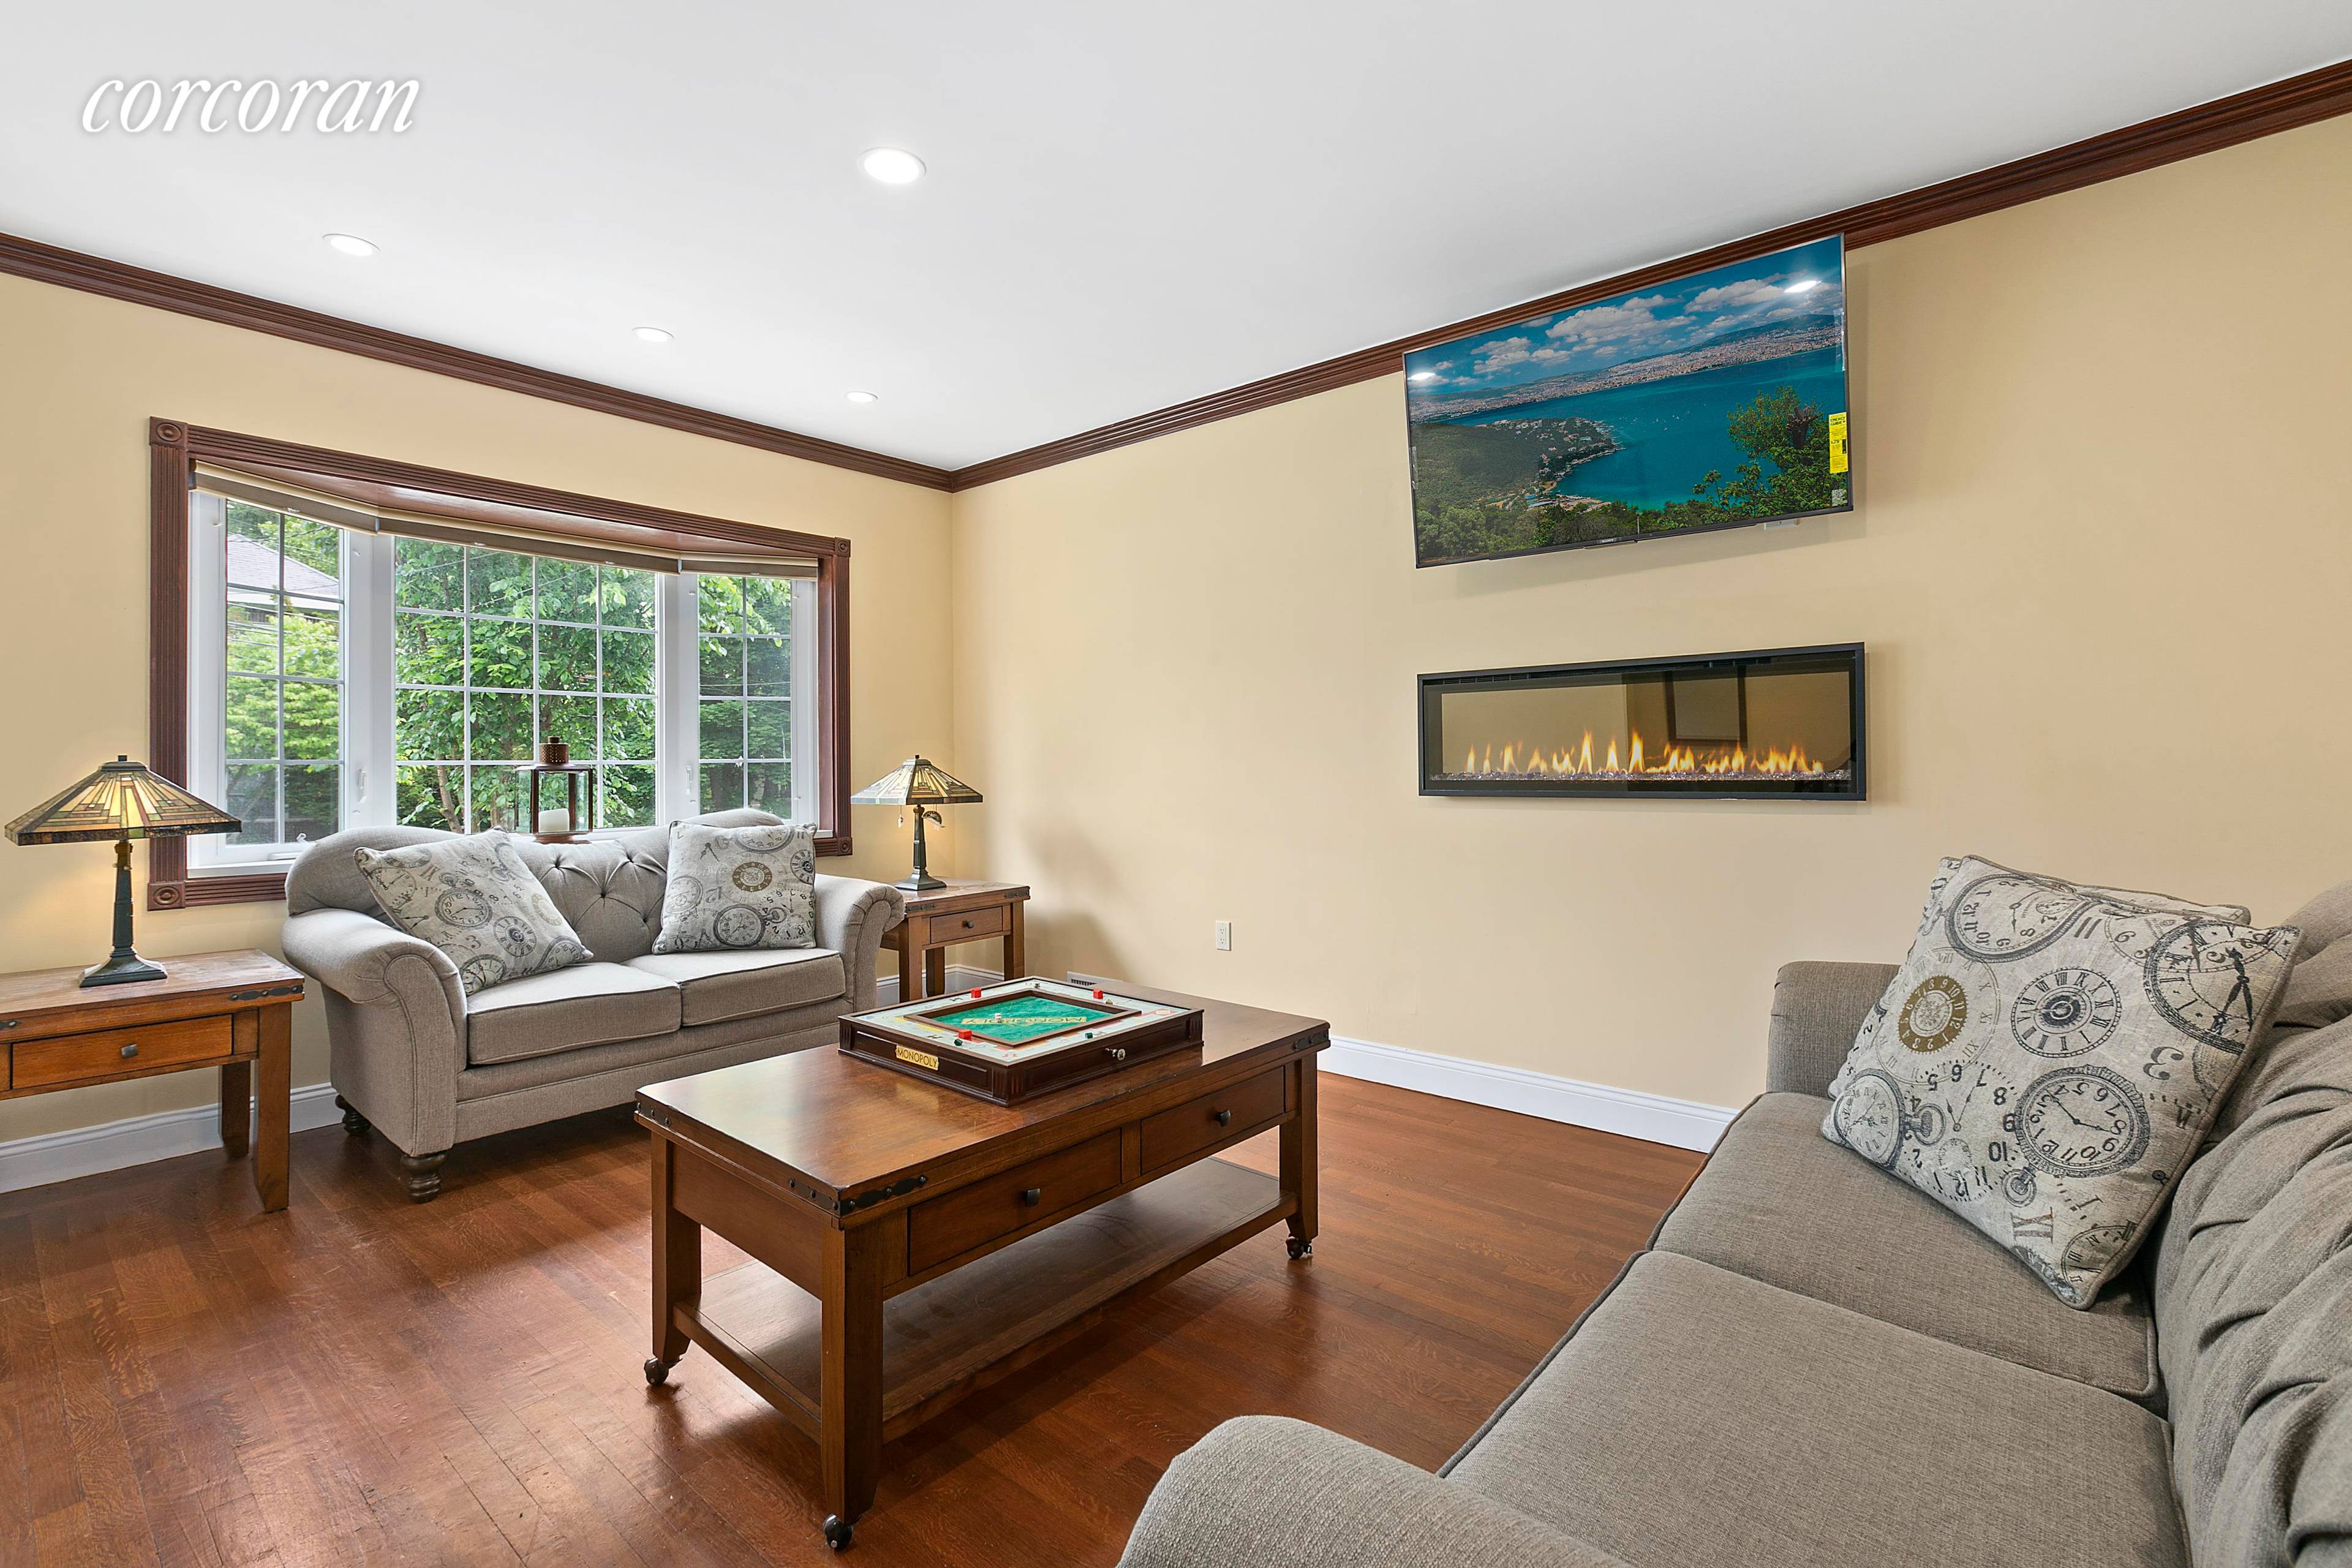 Gorgeous furnished 3 bedroom townhouse in the highly desirable Fieldston section of the Bronx.